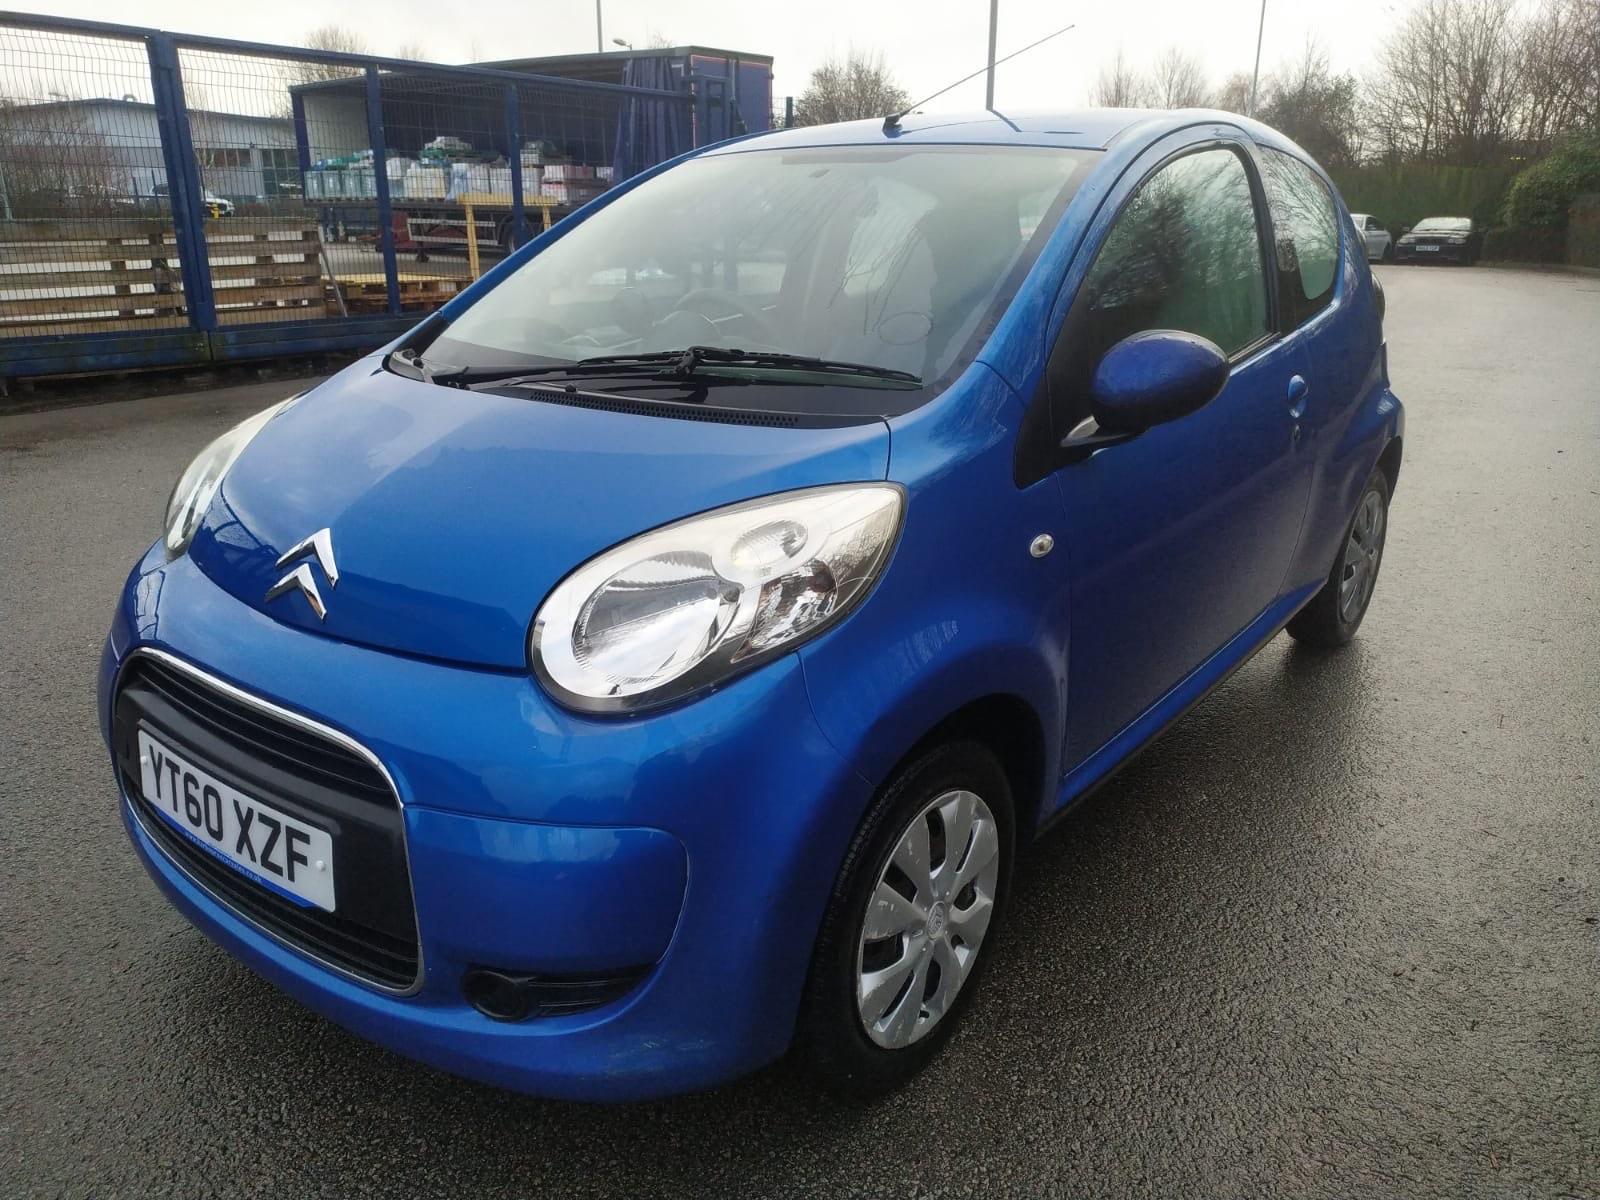 Used Citroën C1 Review - 2005-2014